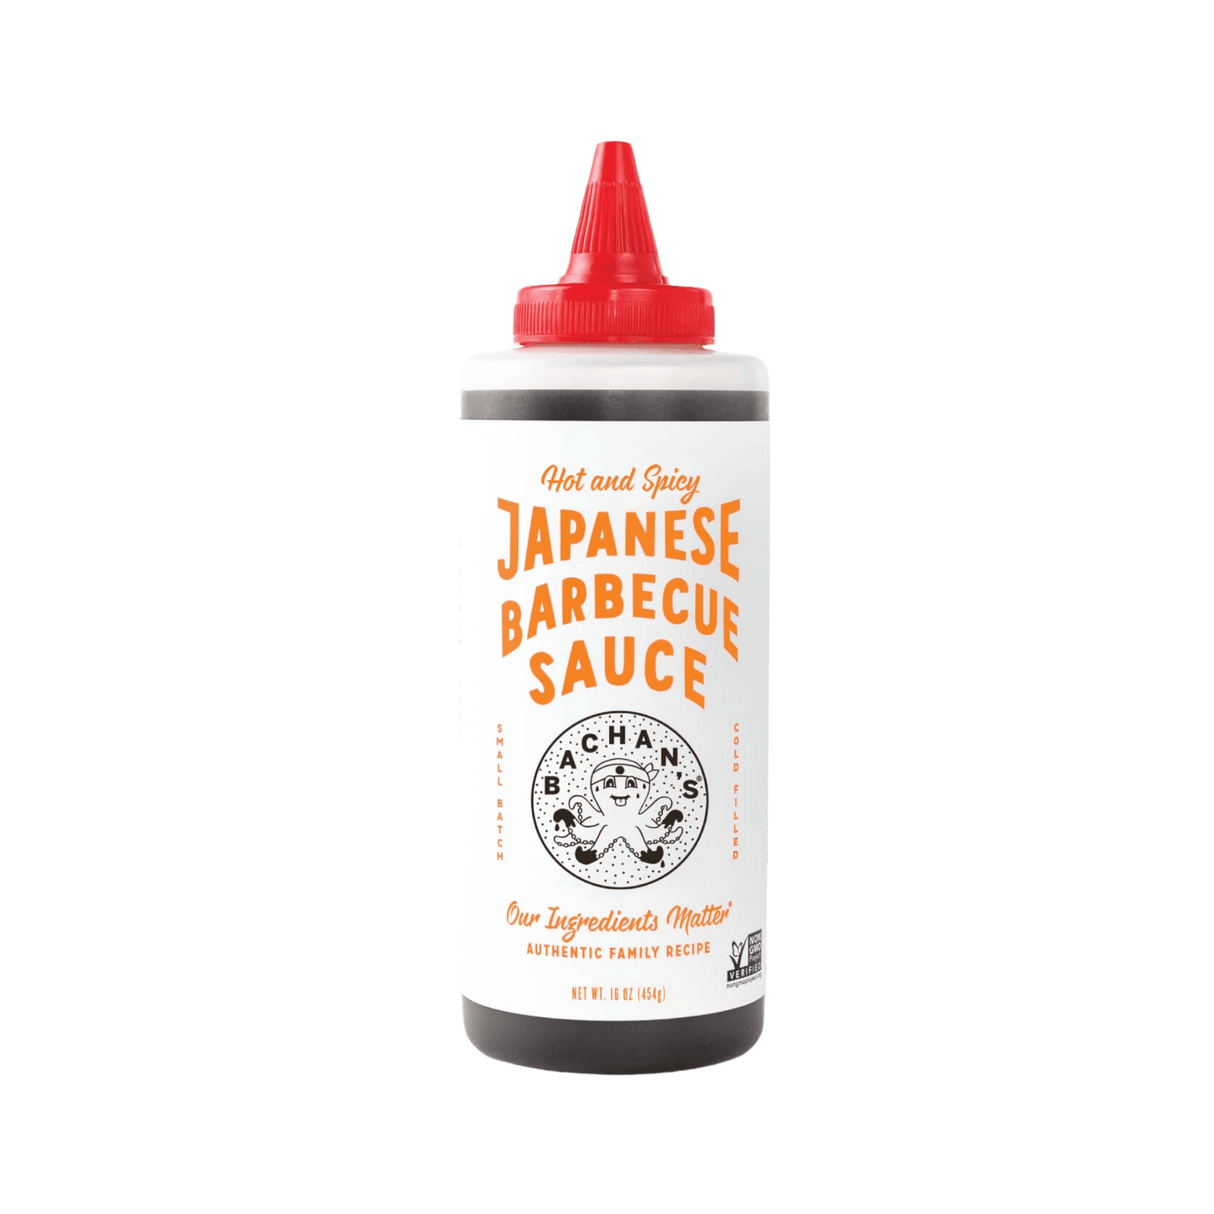 Bachan’s Hot and Spicy Japanese Barbecue Sauce